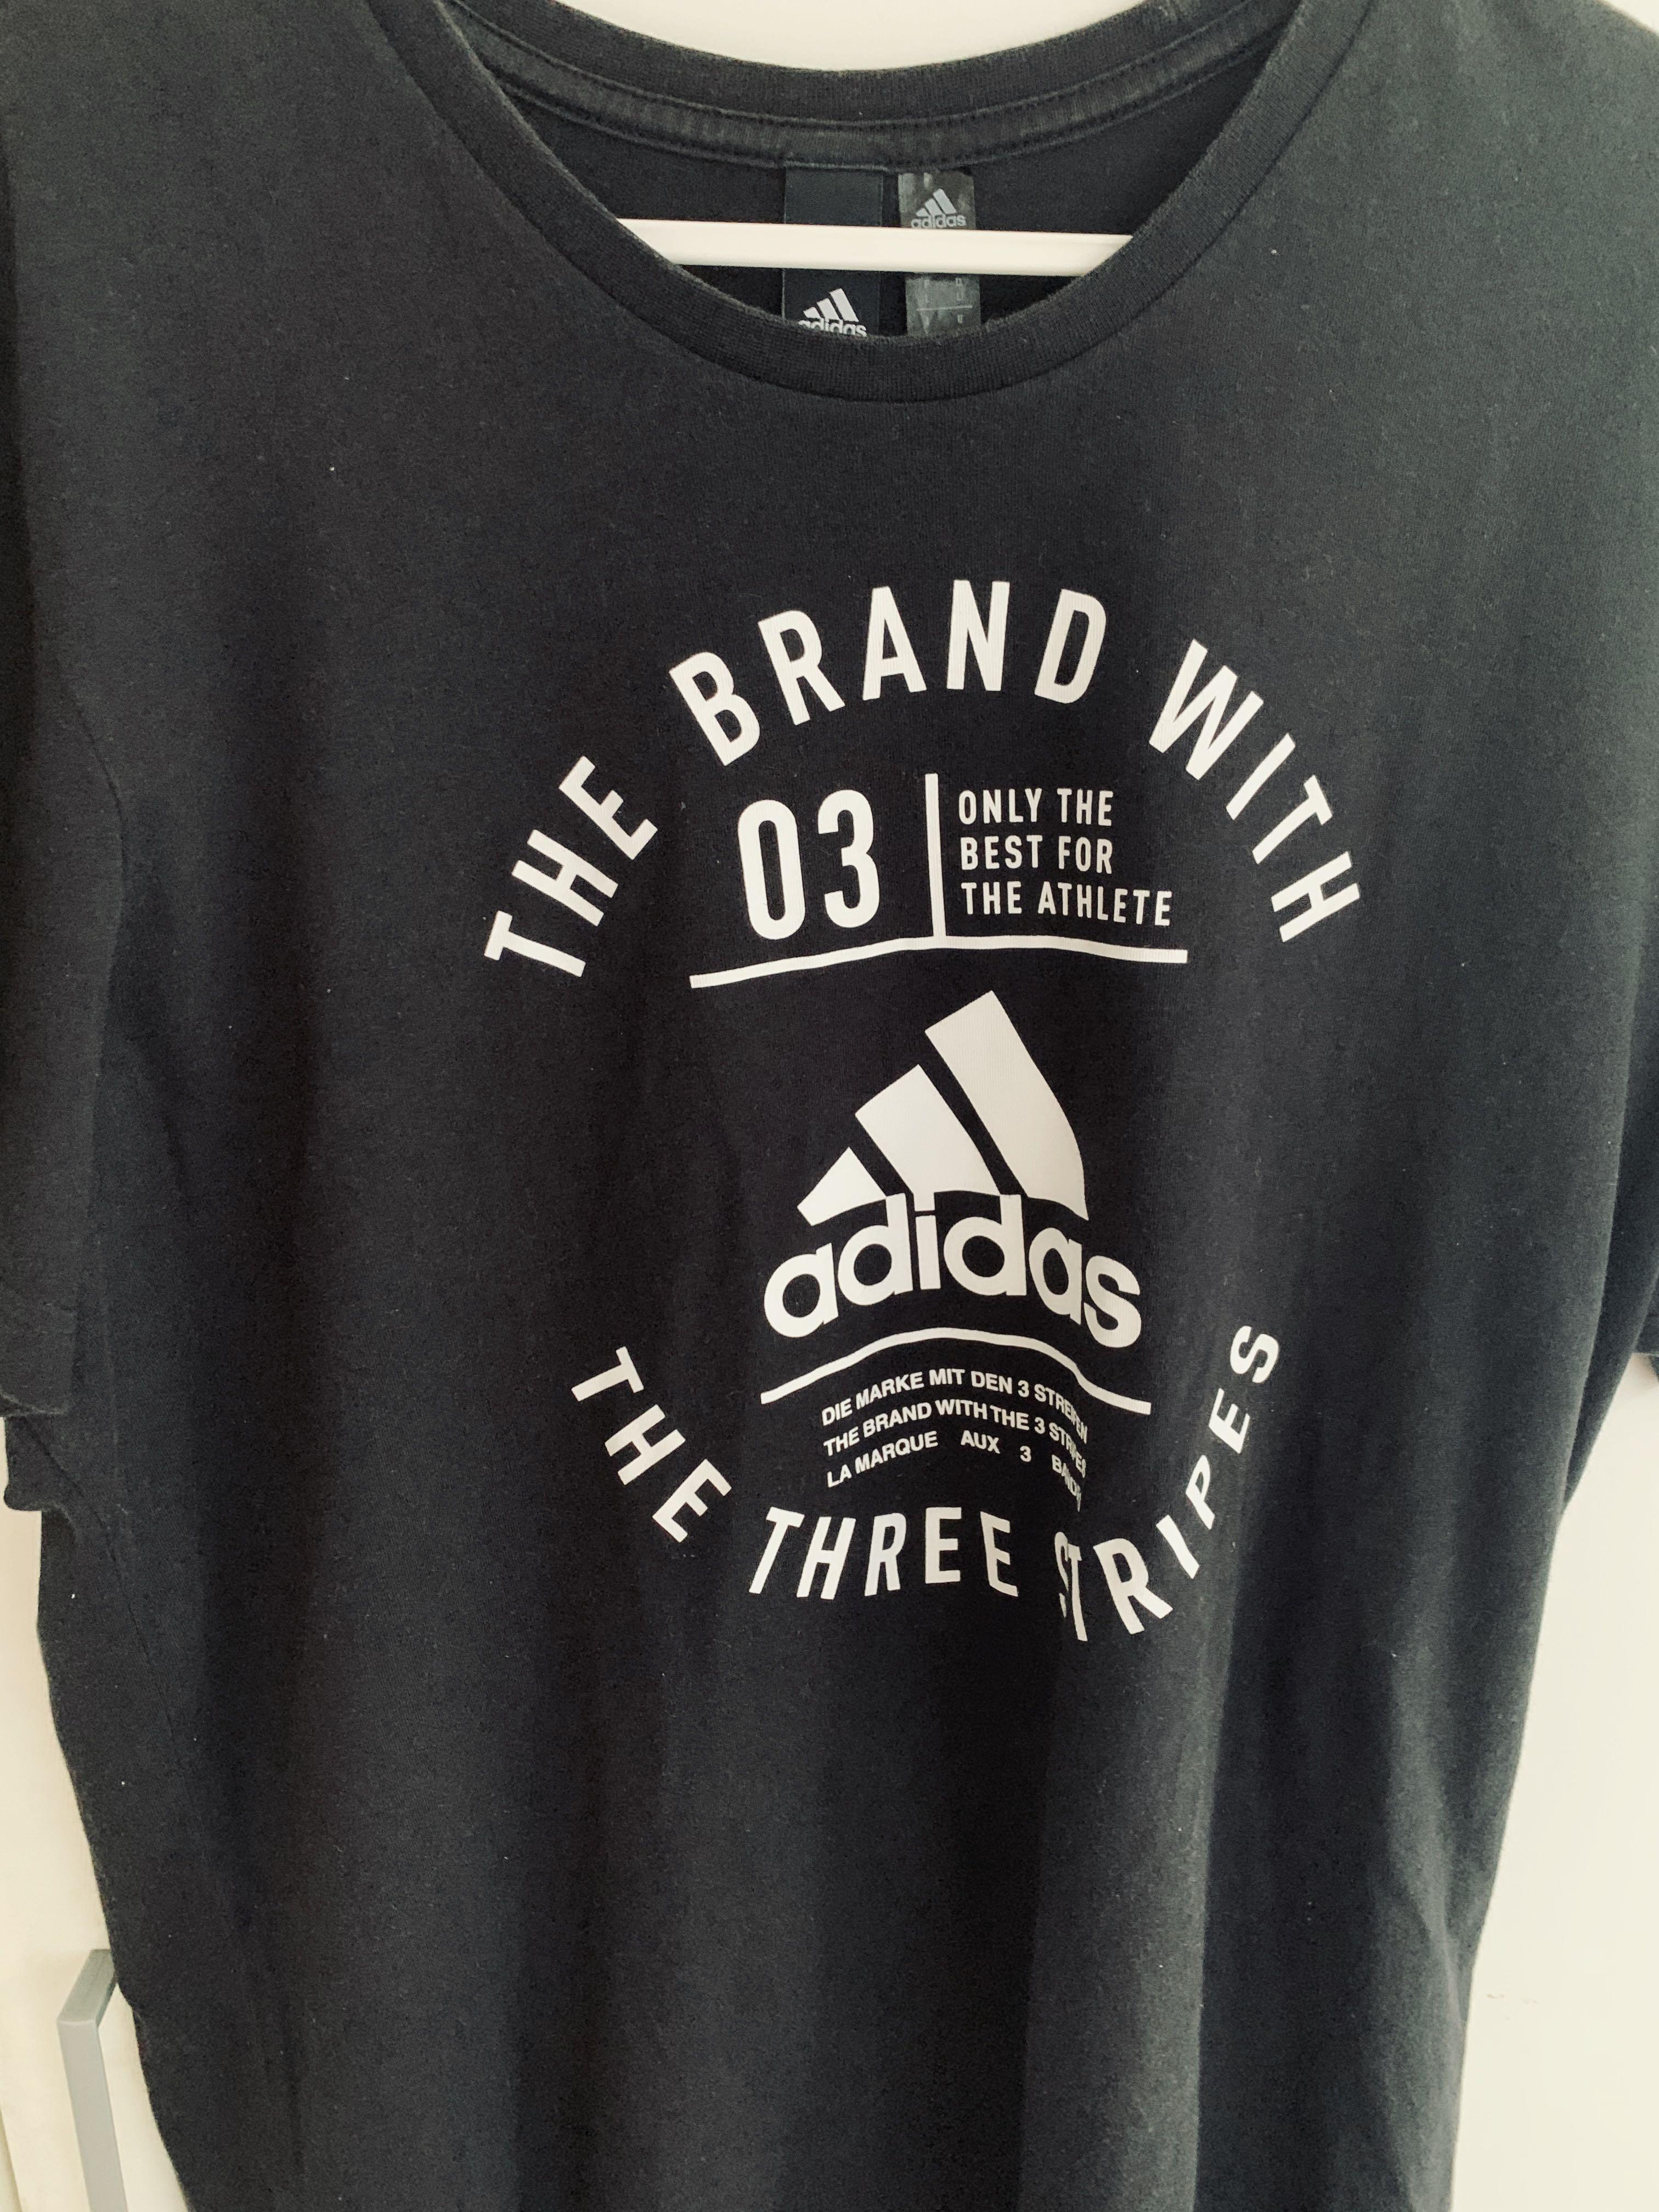 the brand with the three stripes shirt